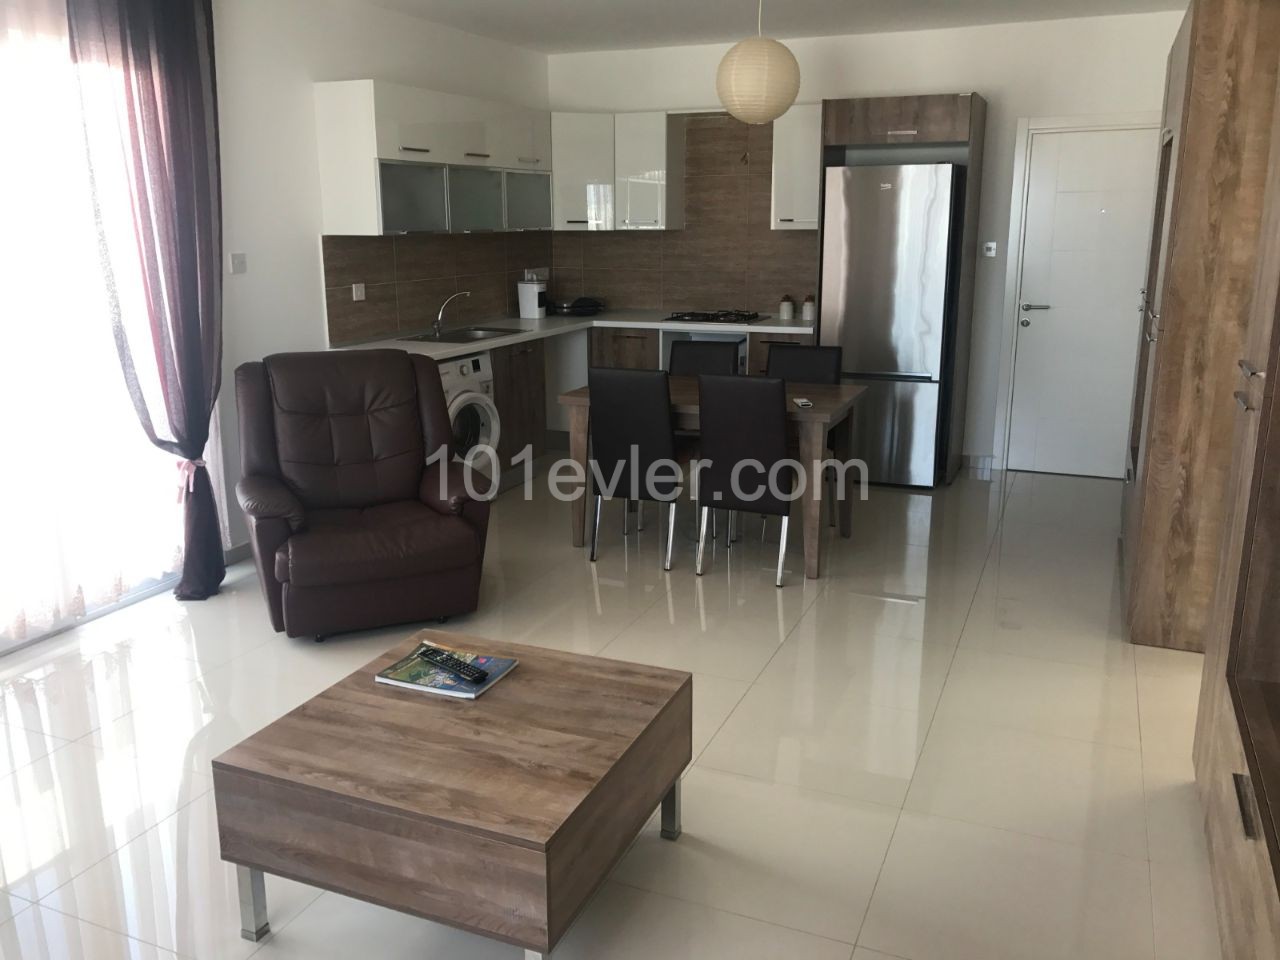 Two Bedroom for Rent in Girne